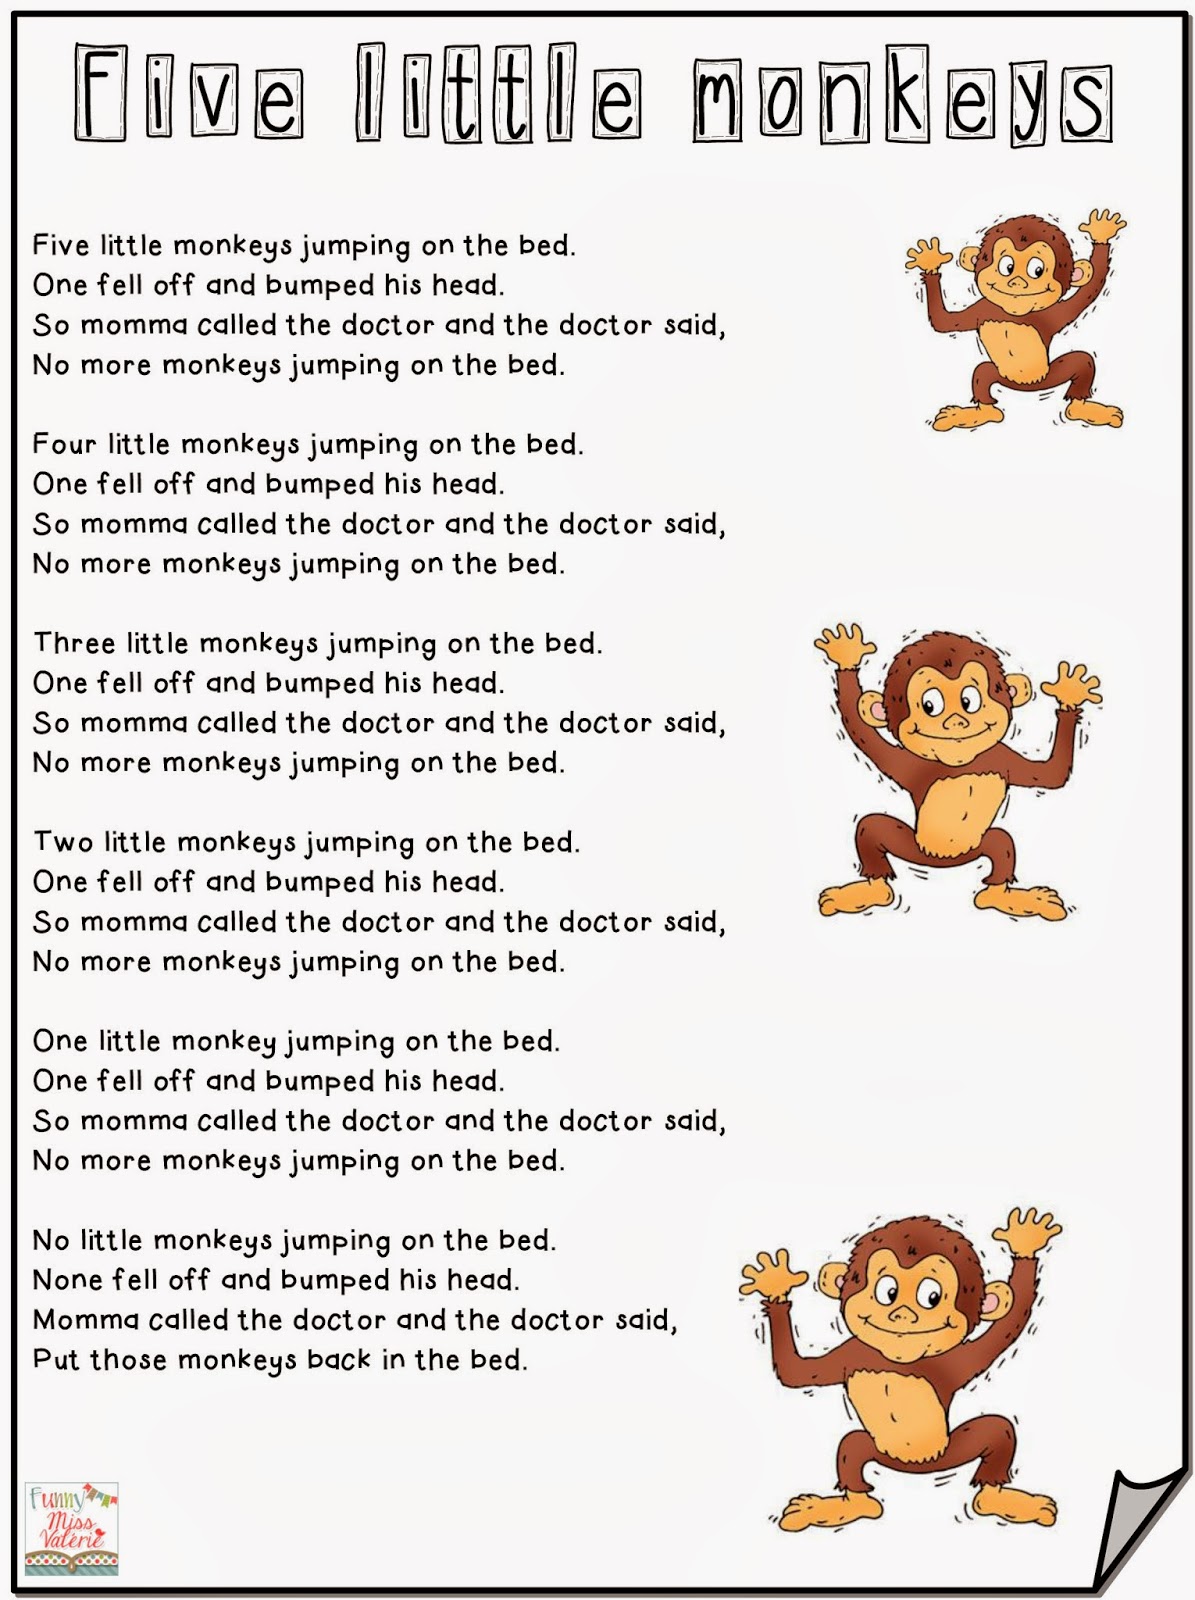 To my activity about Five little monkeys click here